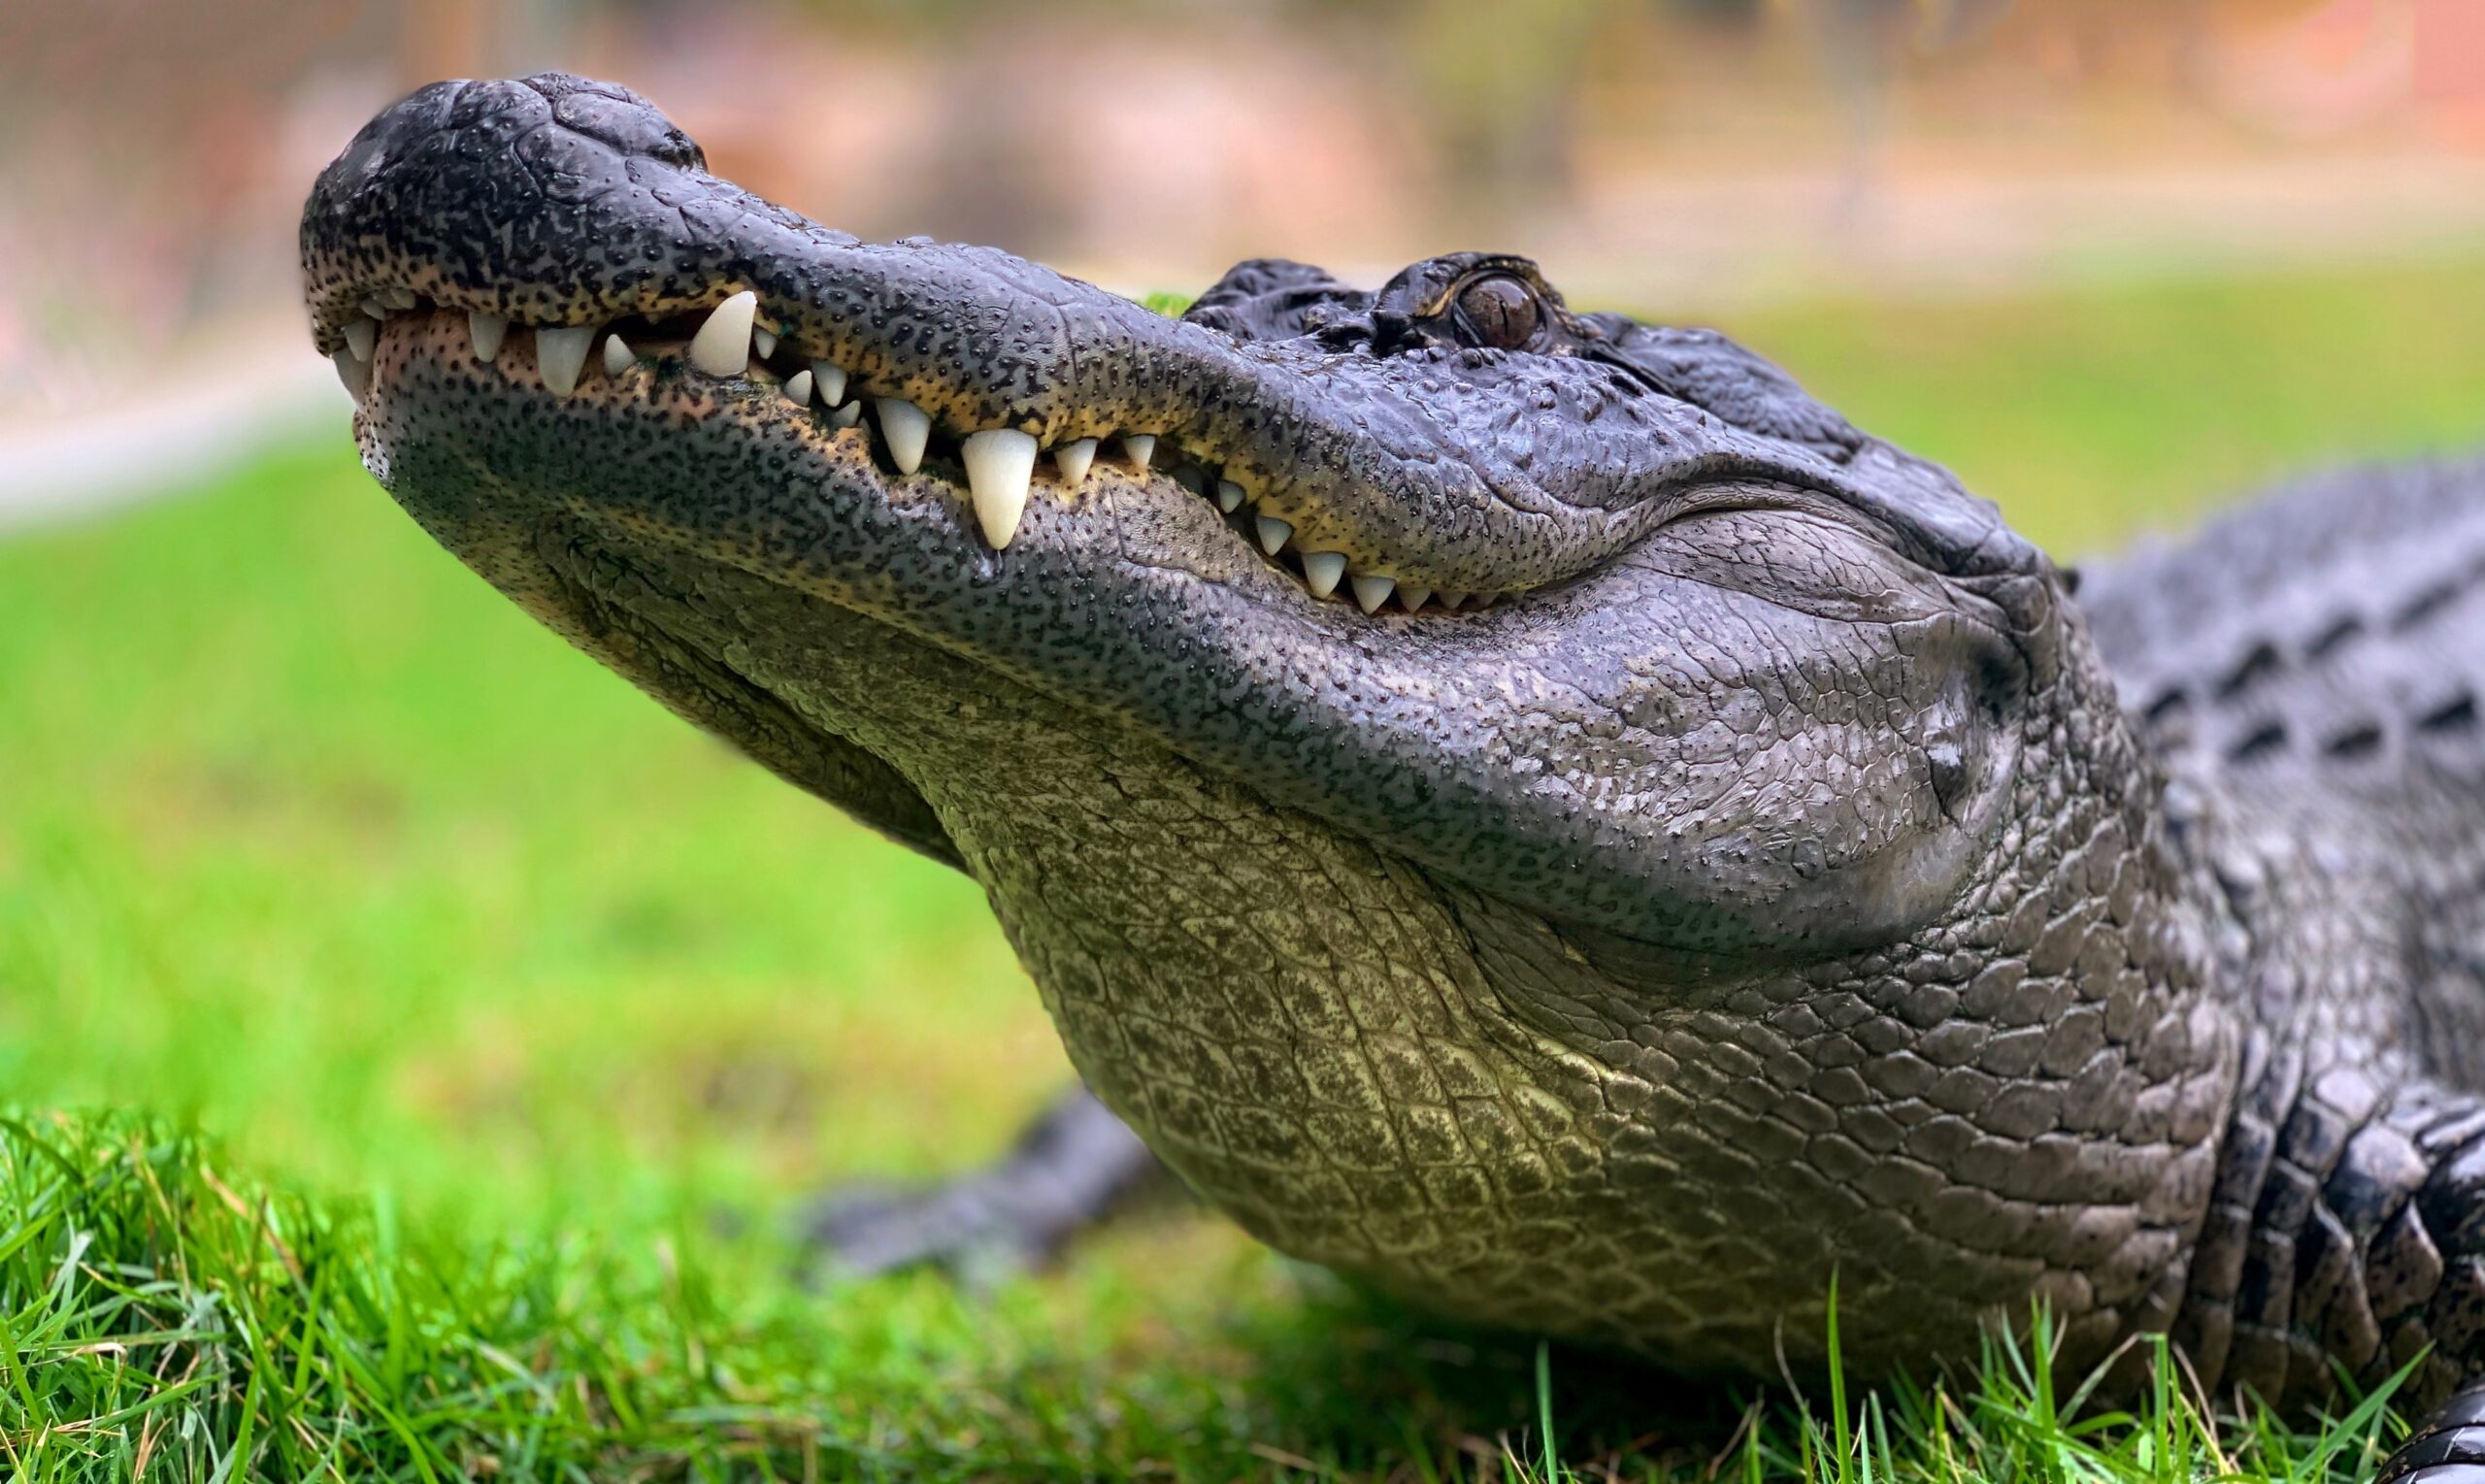 a close-up image of an alligator's face